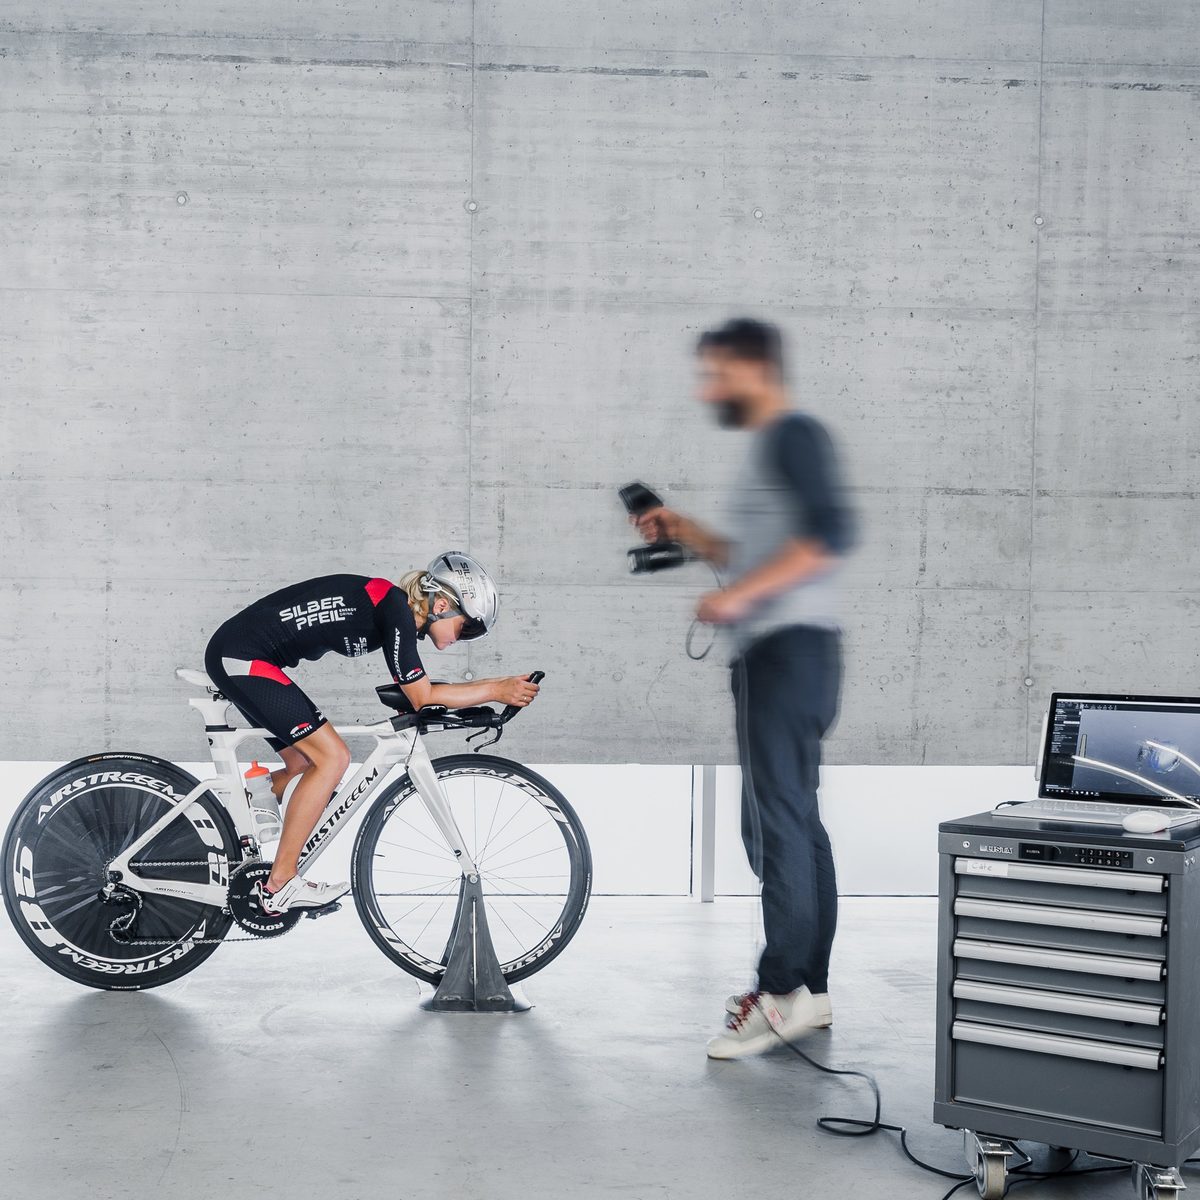 KISKA modeller uses handheld 3D scanner to scan Airstreeem bicycle and rider for improved aerodynamics and ergonomics